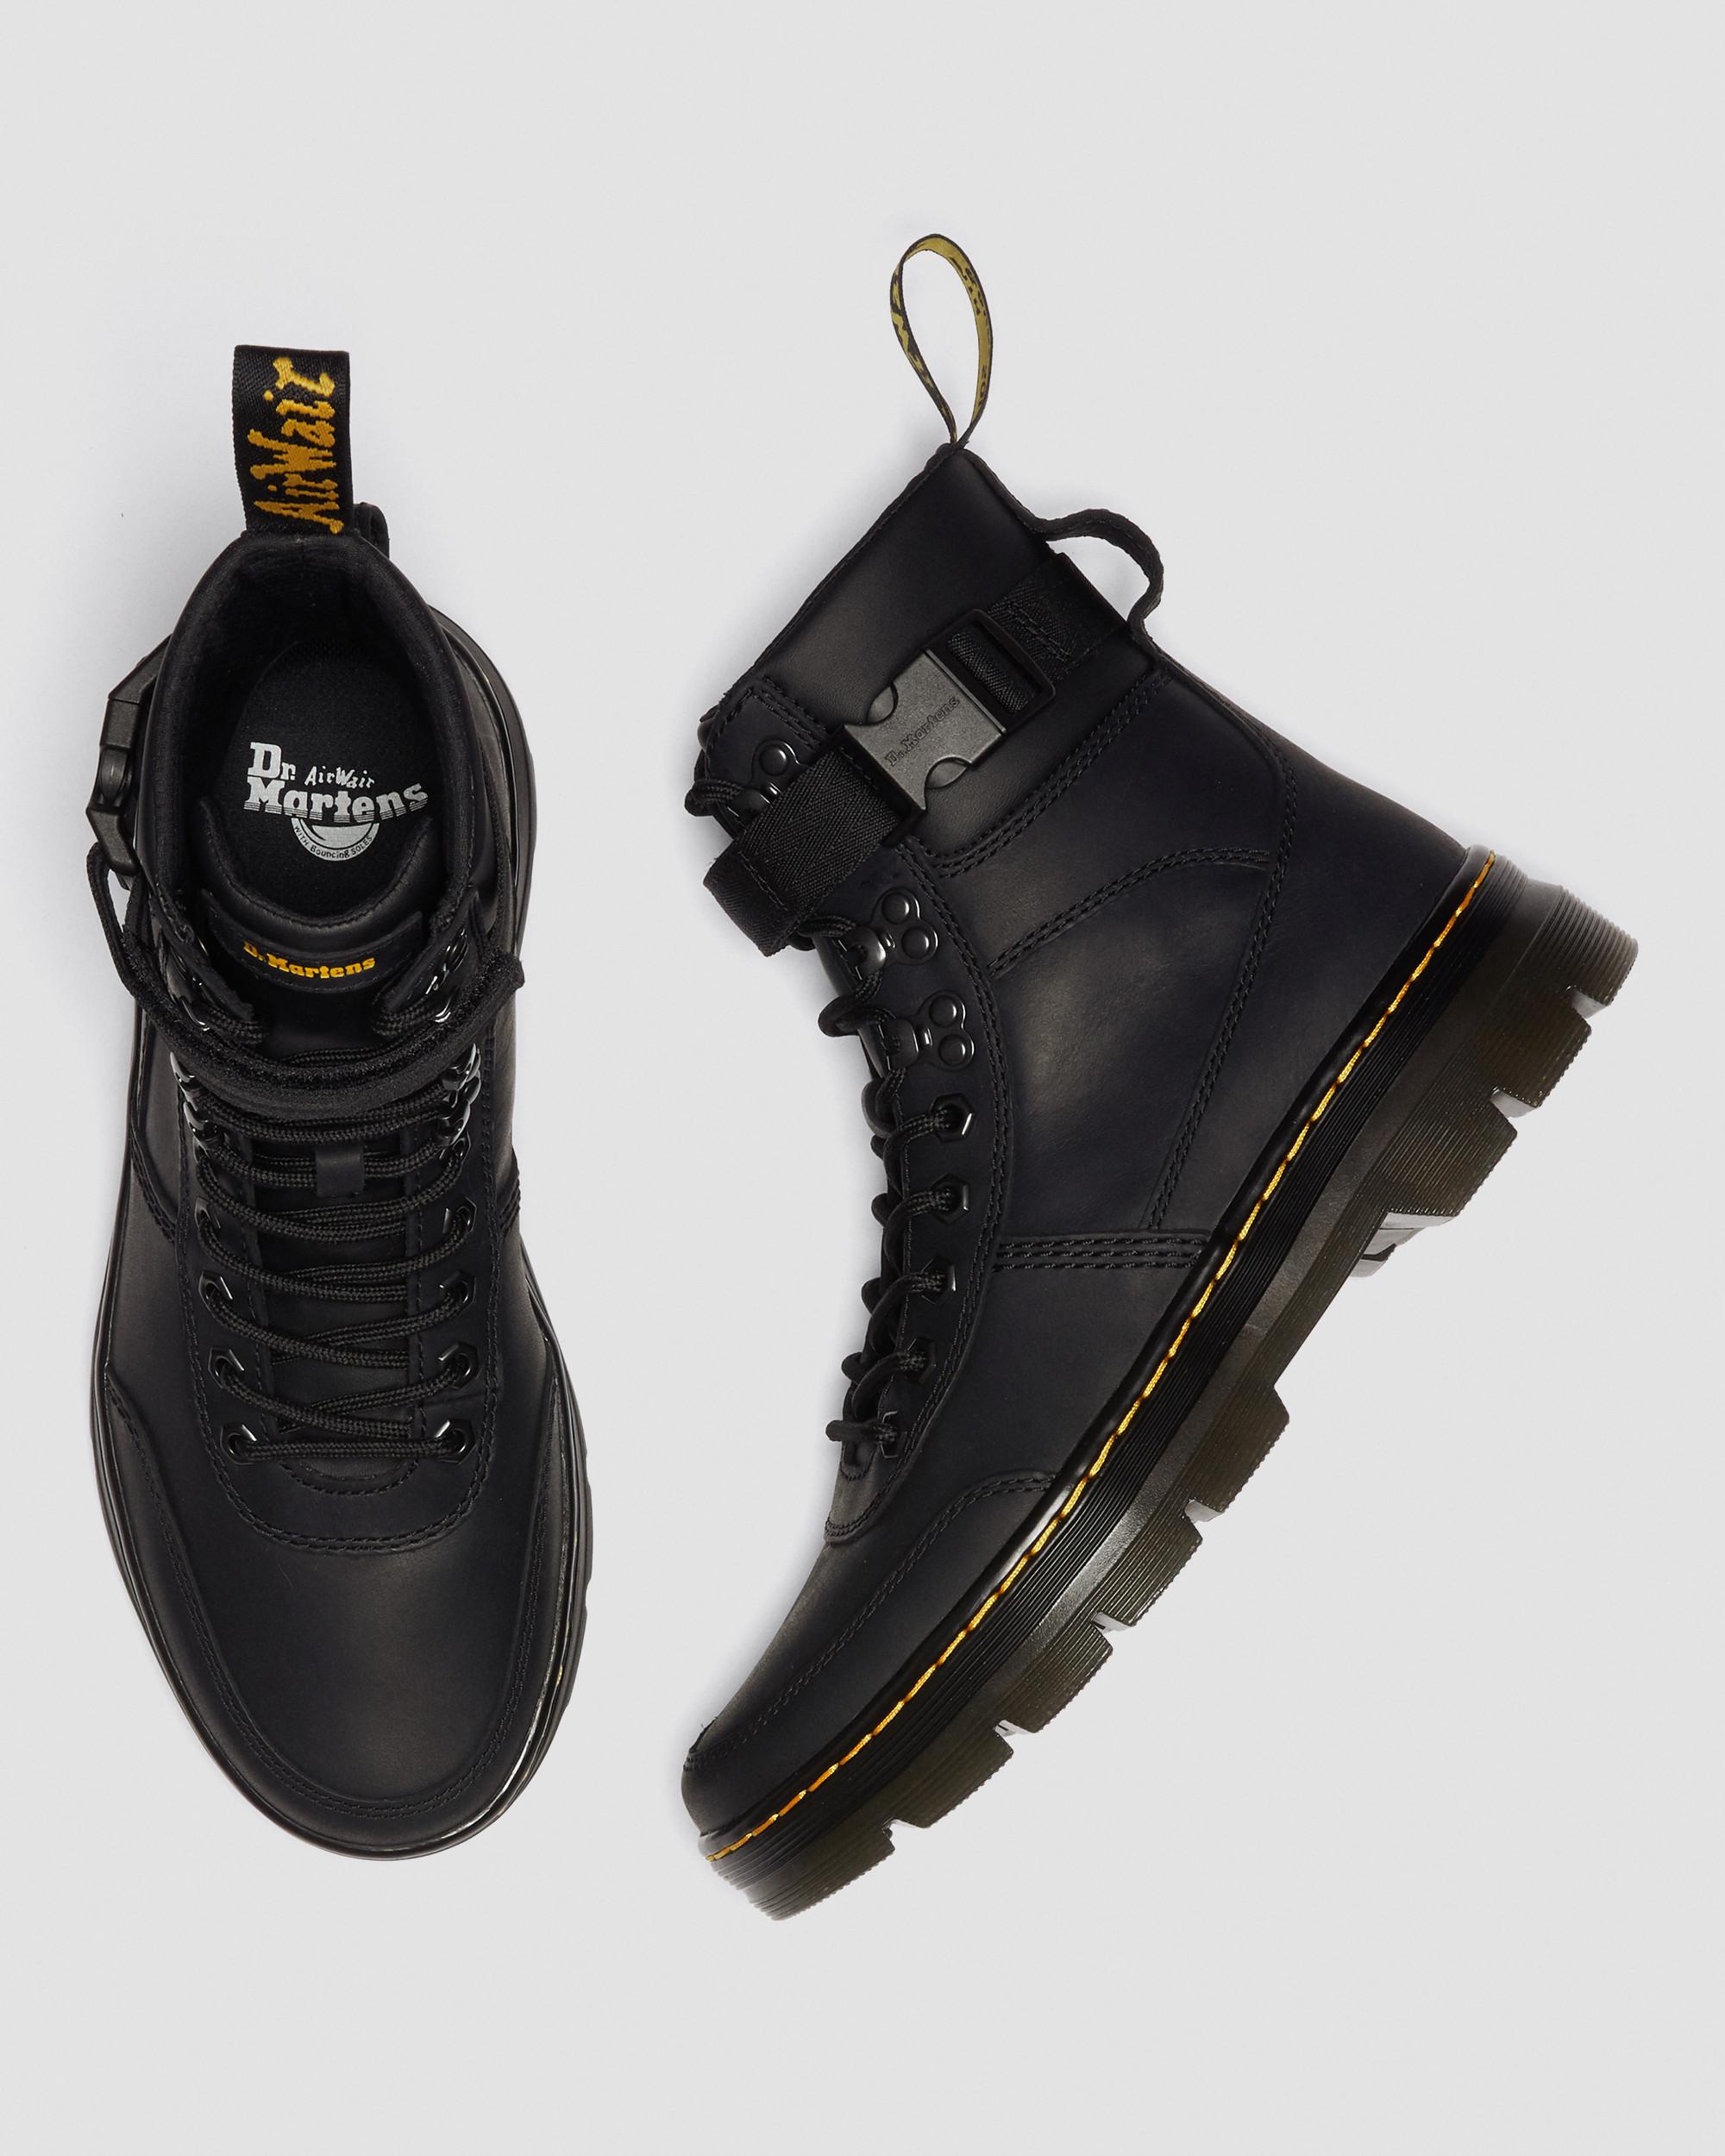 Combs Tech Wyoming Leather Casual BootsCombs Tech Wyoming Leather Casual Boots Dr. Martens